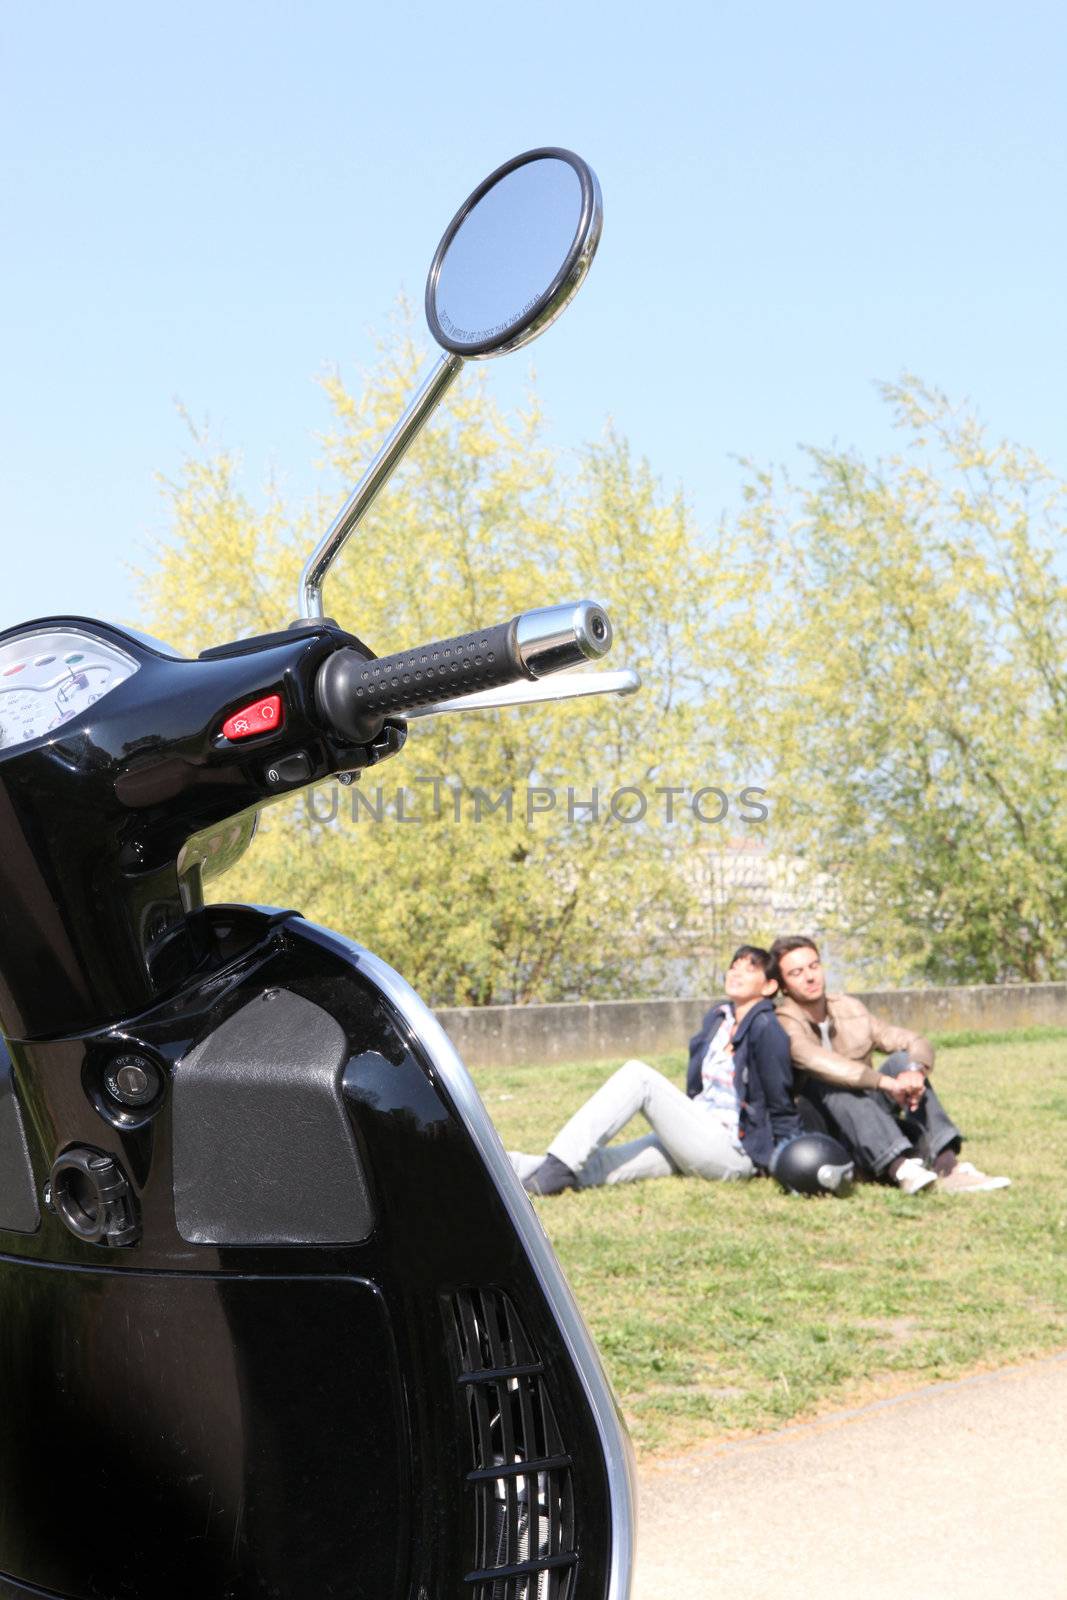 Couple relaxing in a park next to their scooter by phovoir